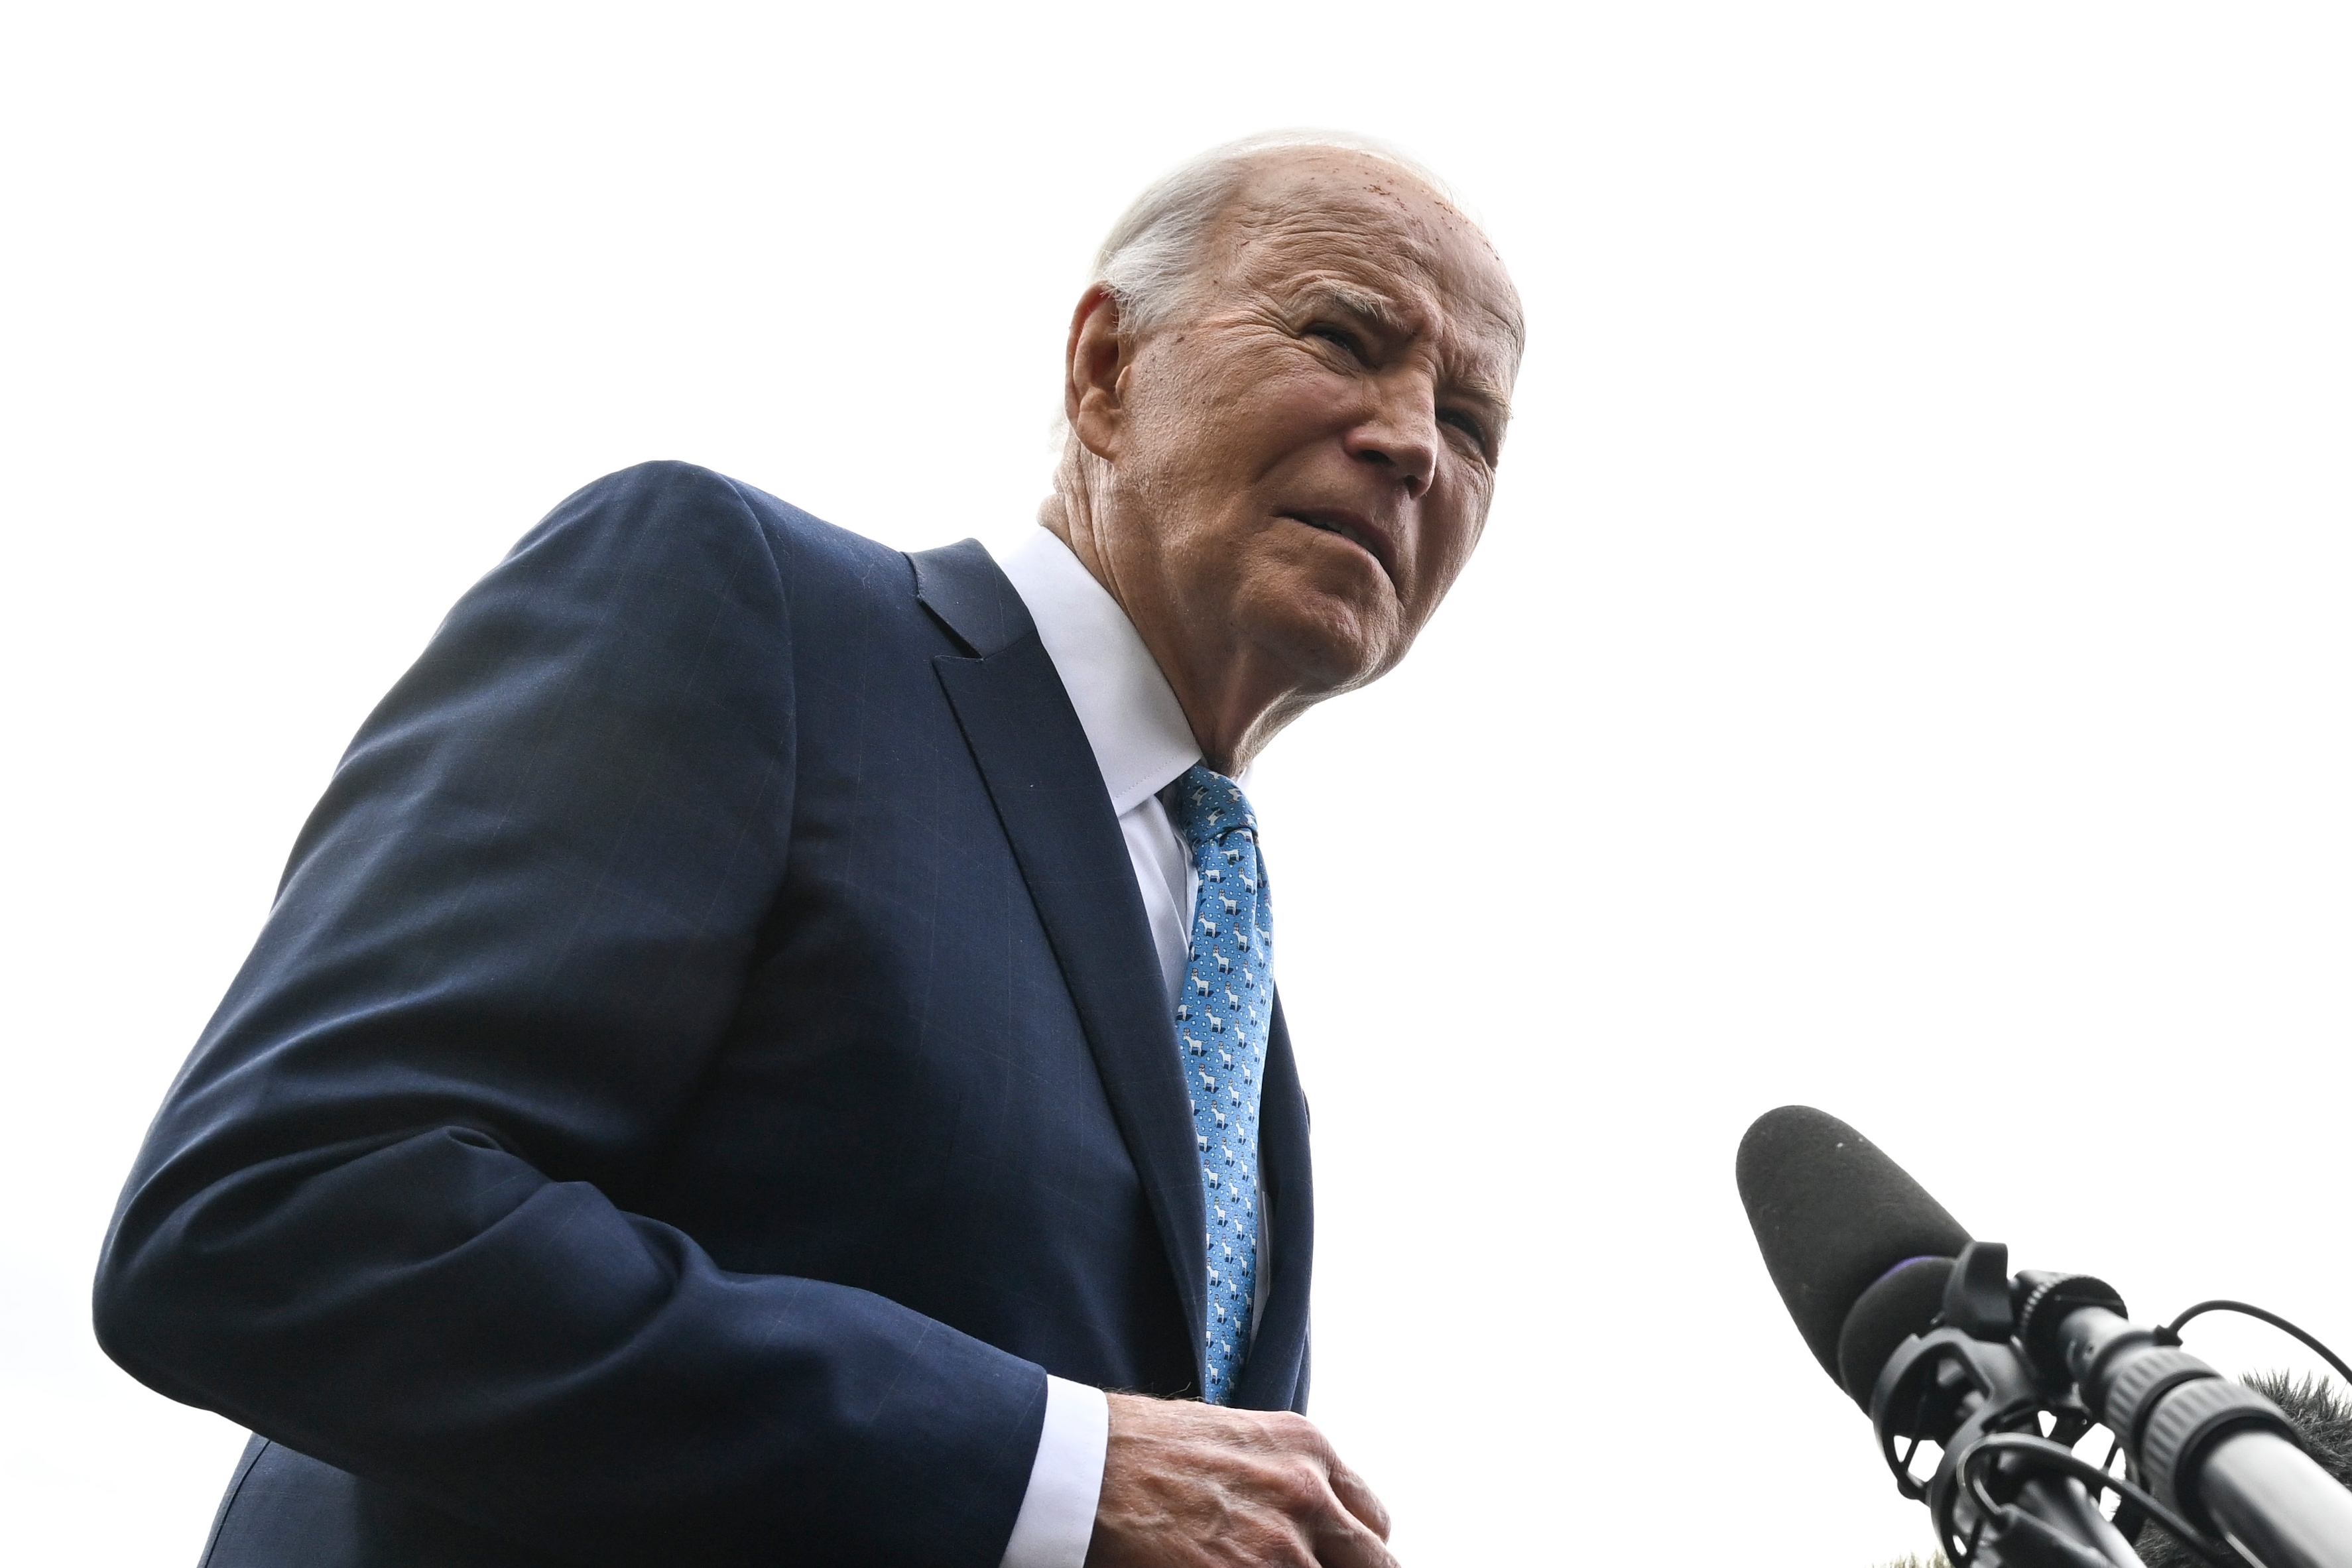 nevada primary: nikki haley loses to ‘none of these candidates,’ biden wins easily